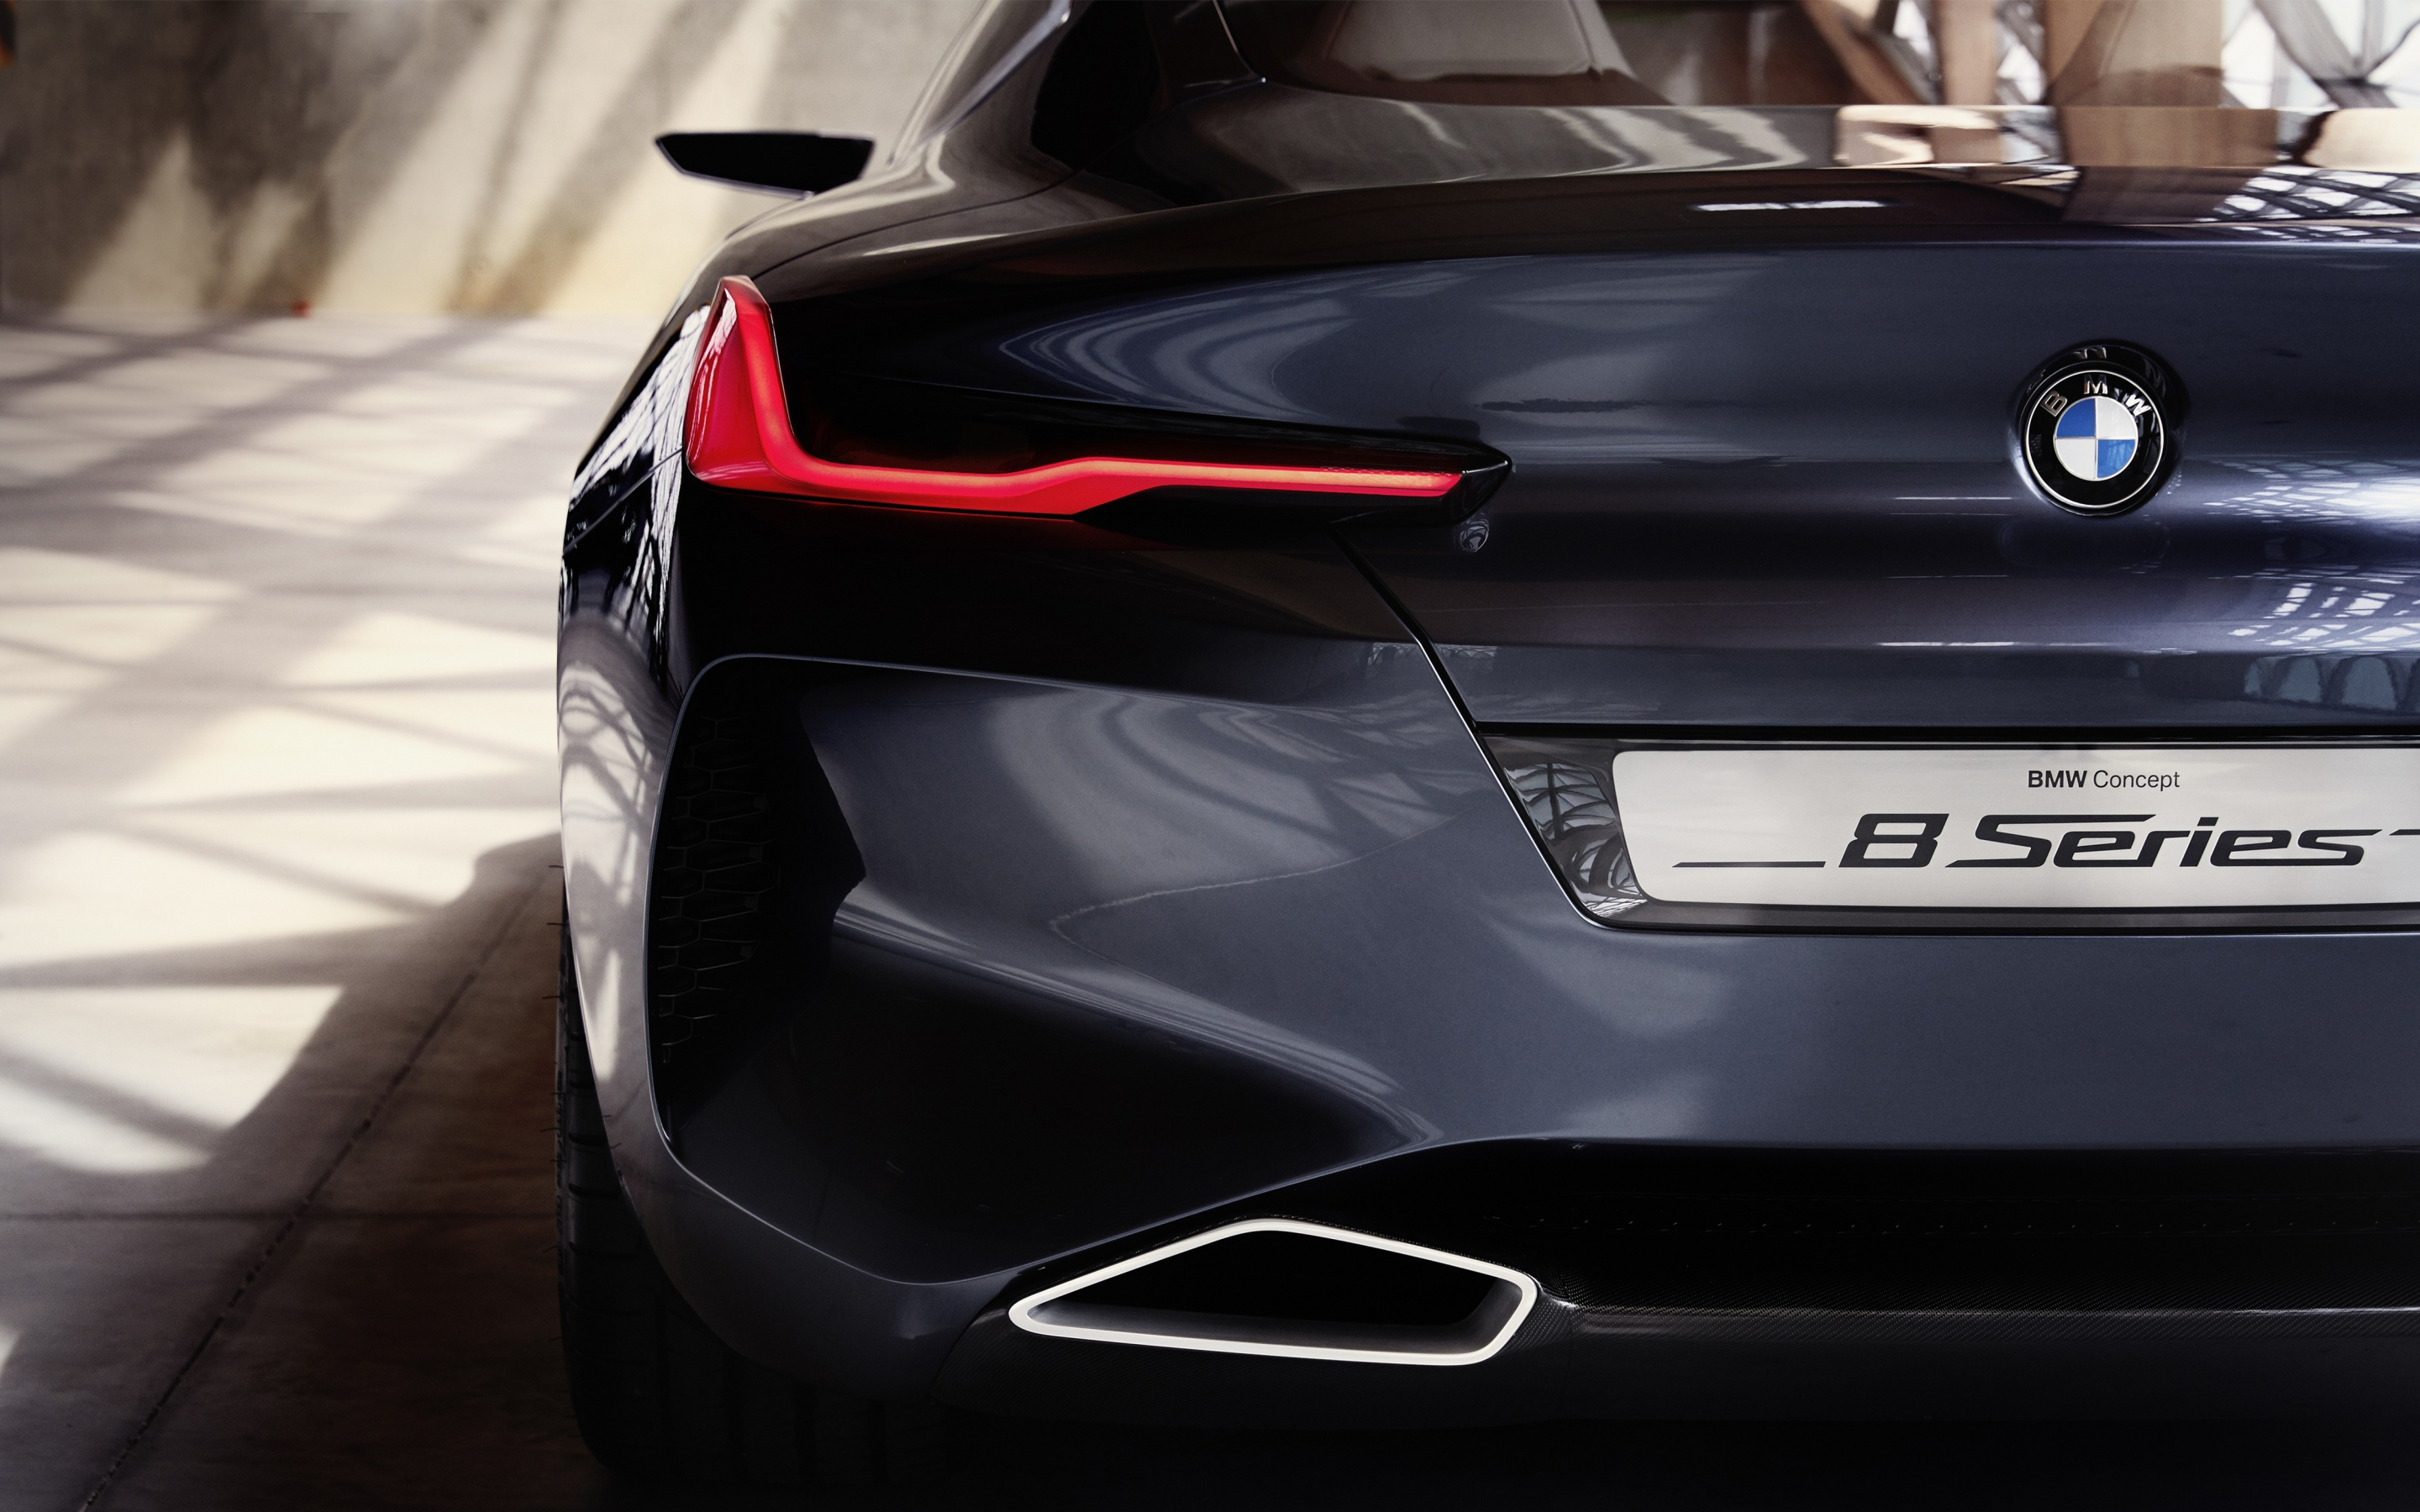 2018, BMW concept 8 series, taillight, 2880x1800 wallpaper